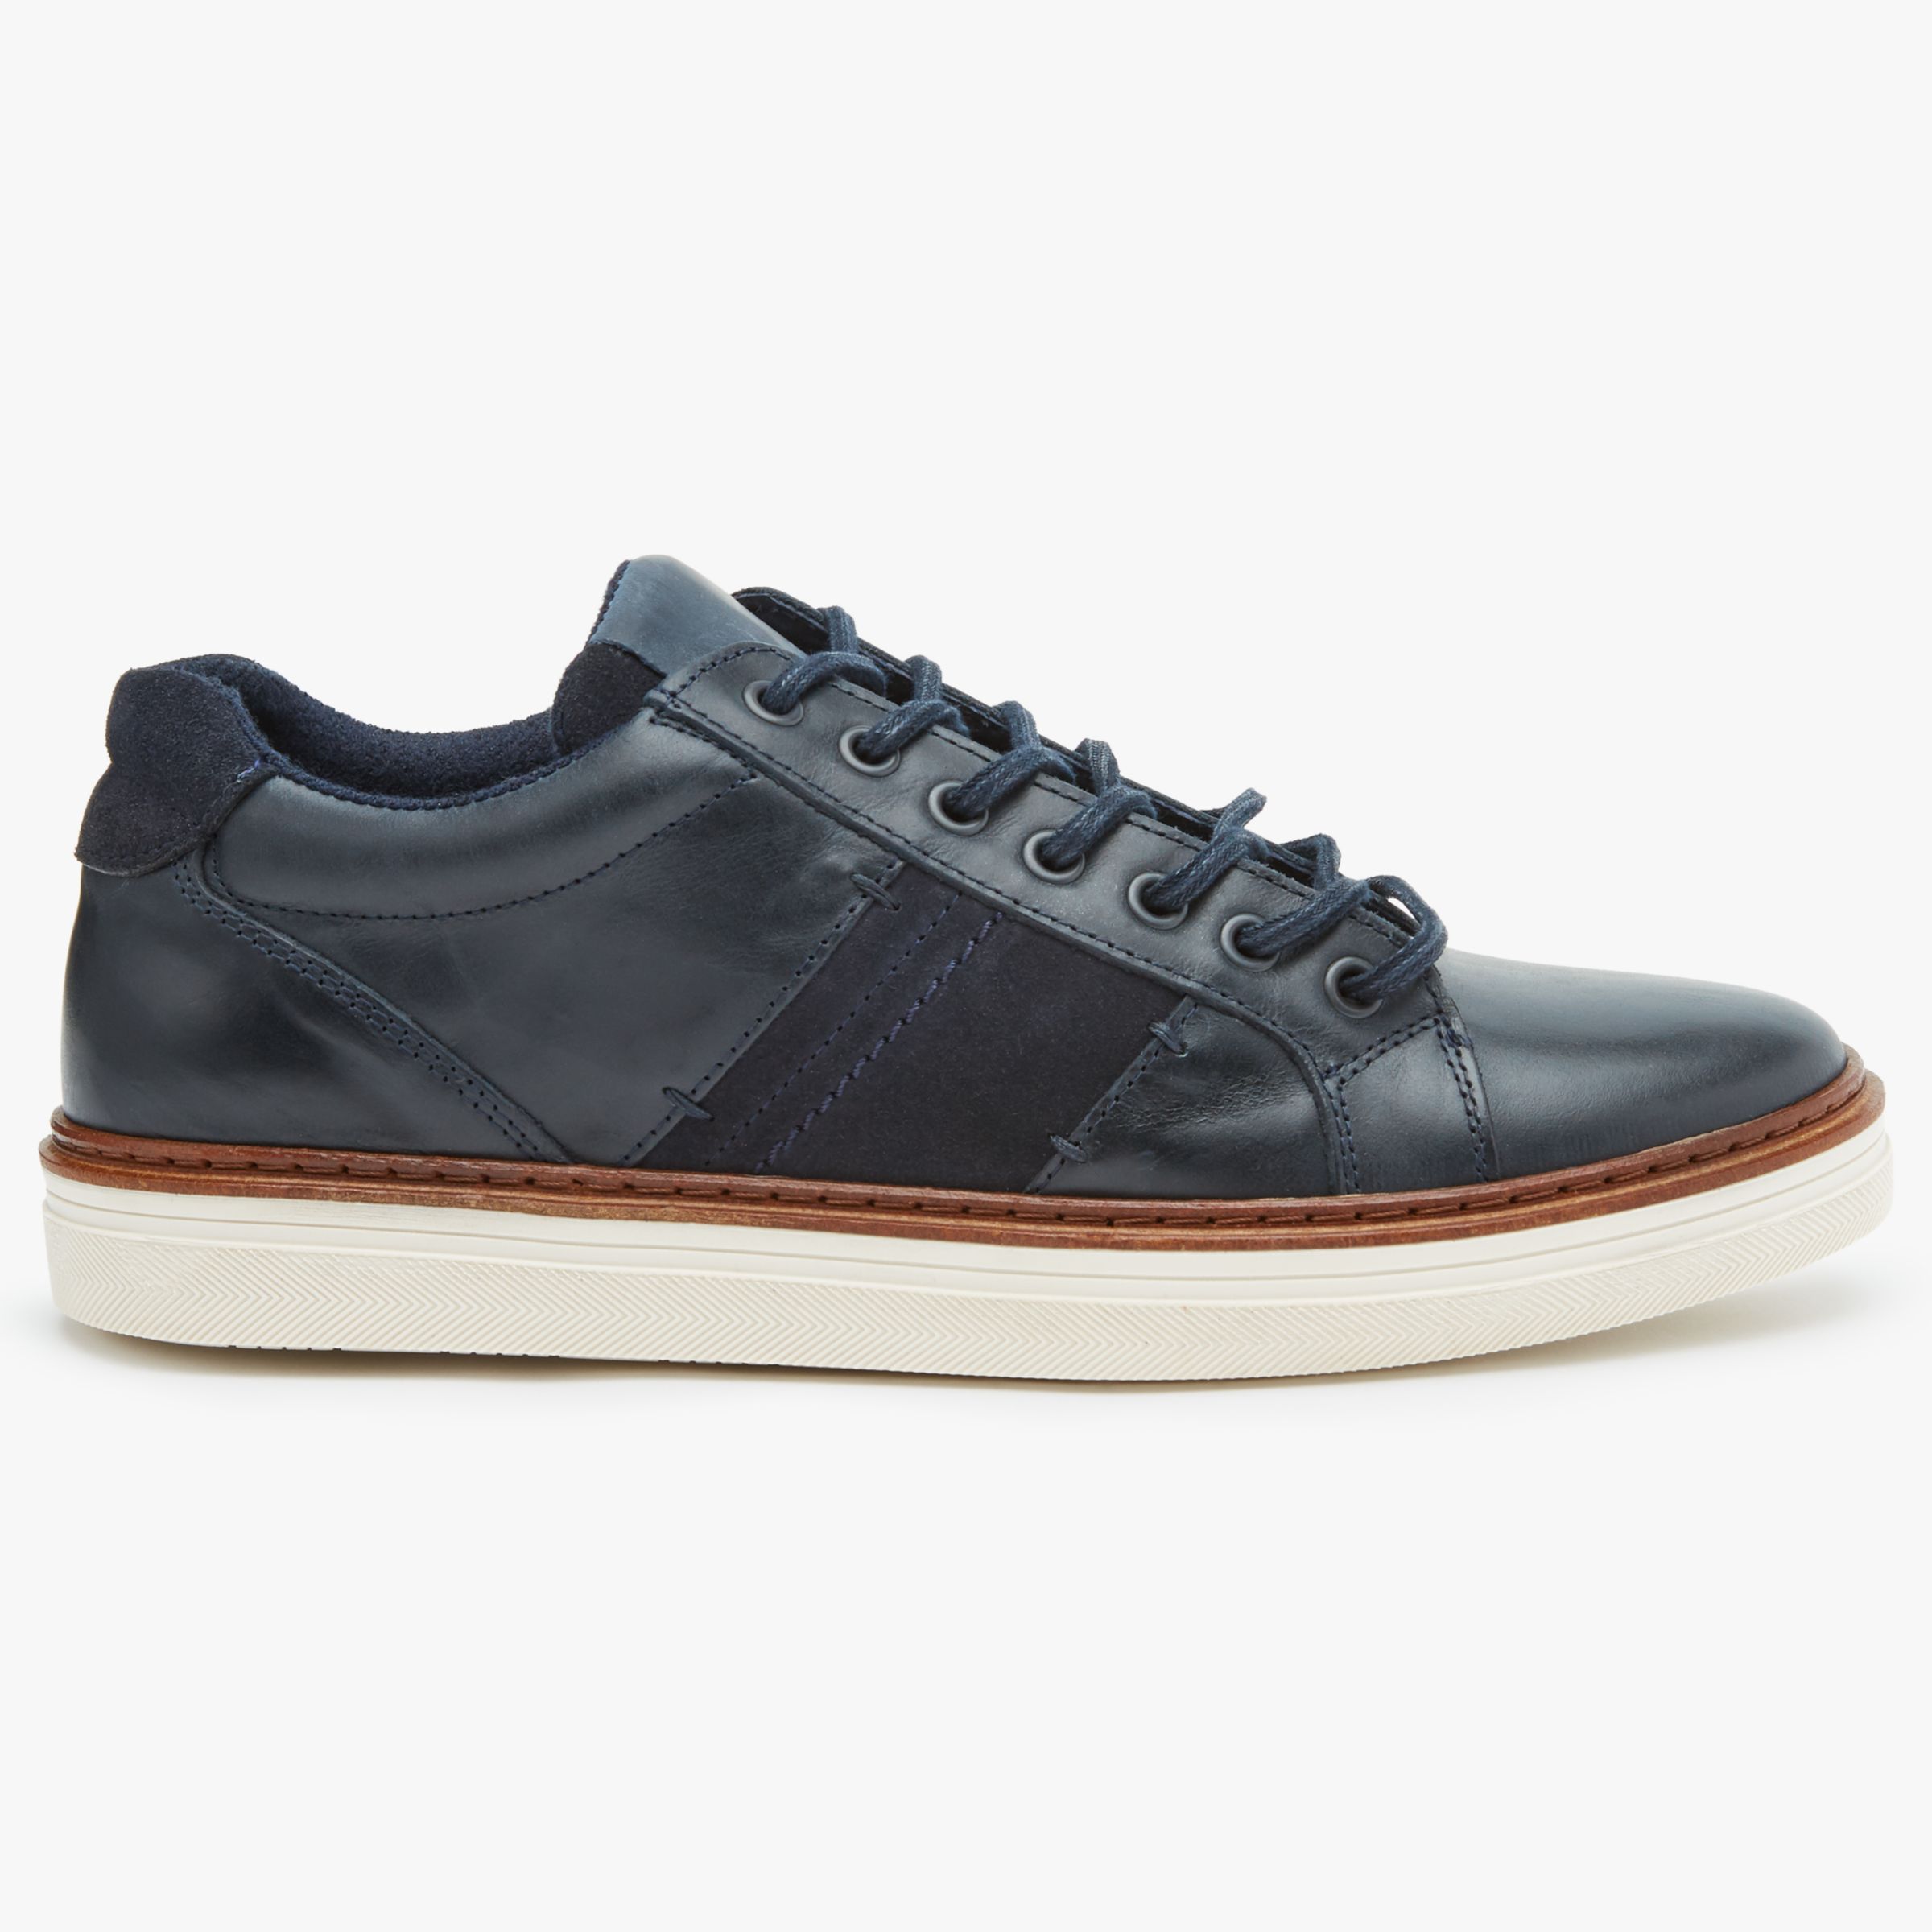 John Lewis & Partners Stamford Cupsole Leather Trainers, Navy, 8